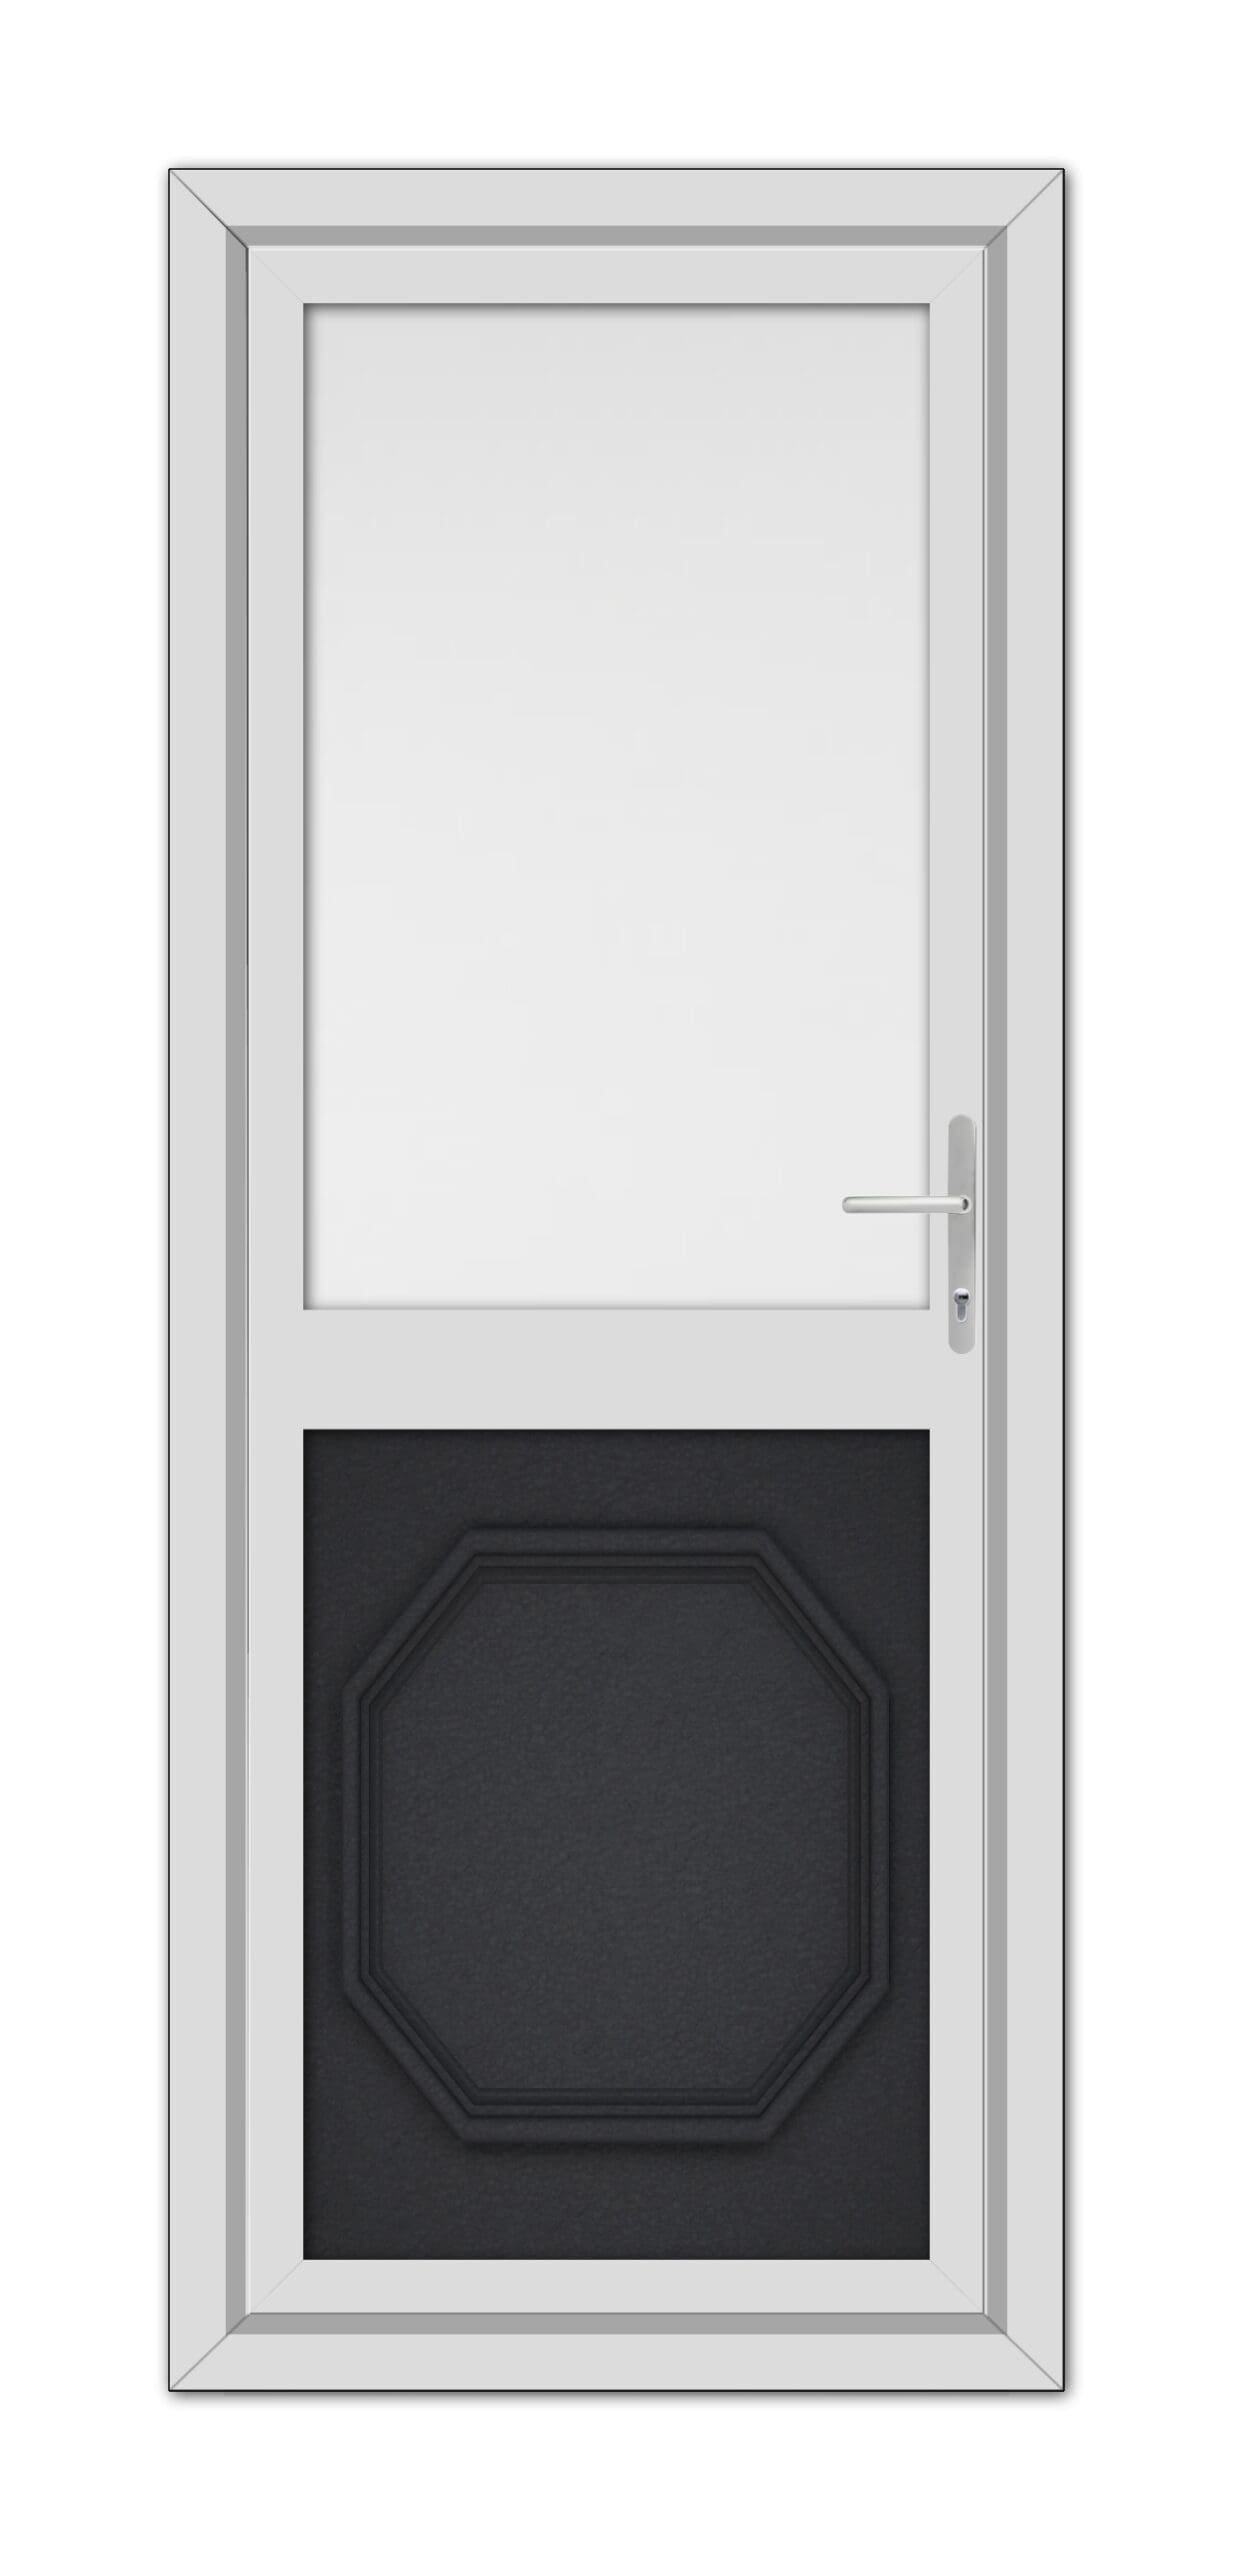 A modern Black Brown Buckingham Half uPVC Back Door featuring a geometric black panel at the bottom and a small square window at the top, with a silver handle on the right.